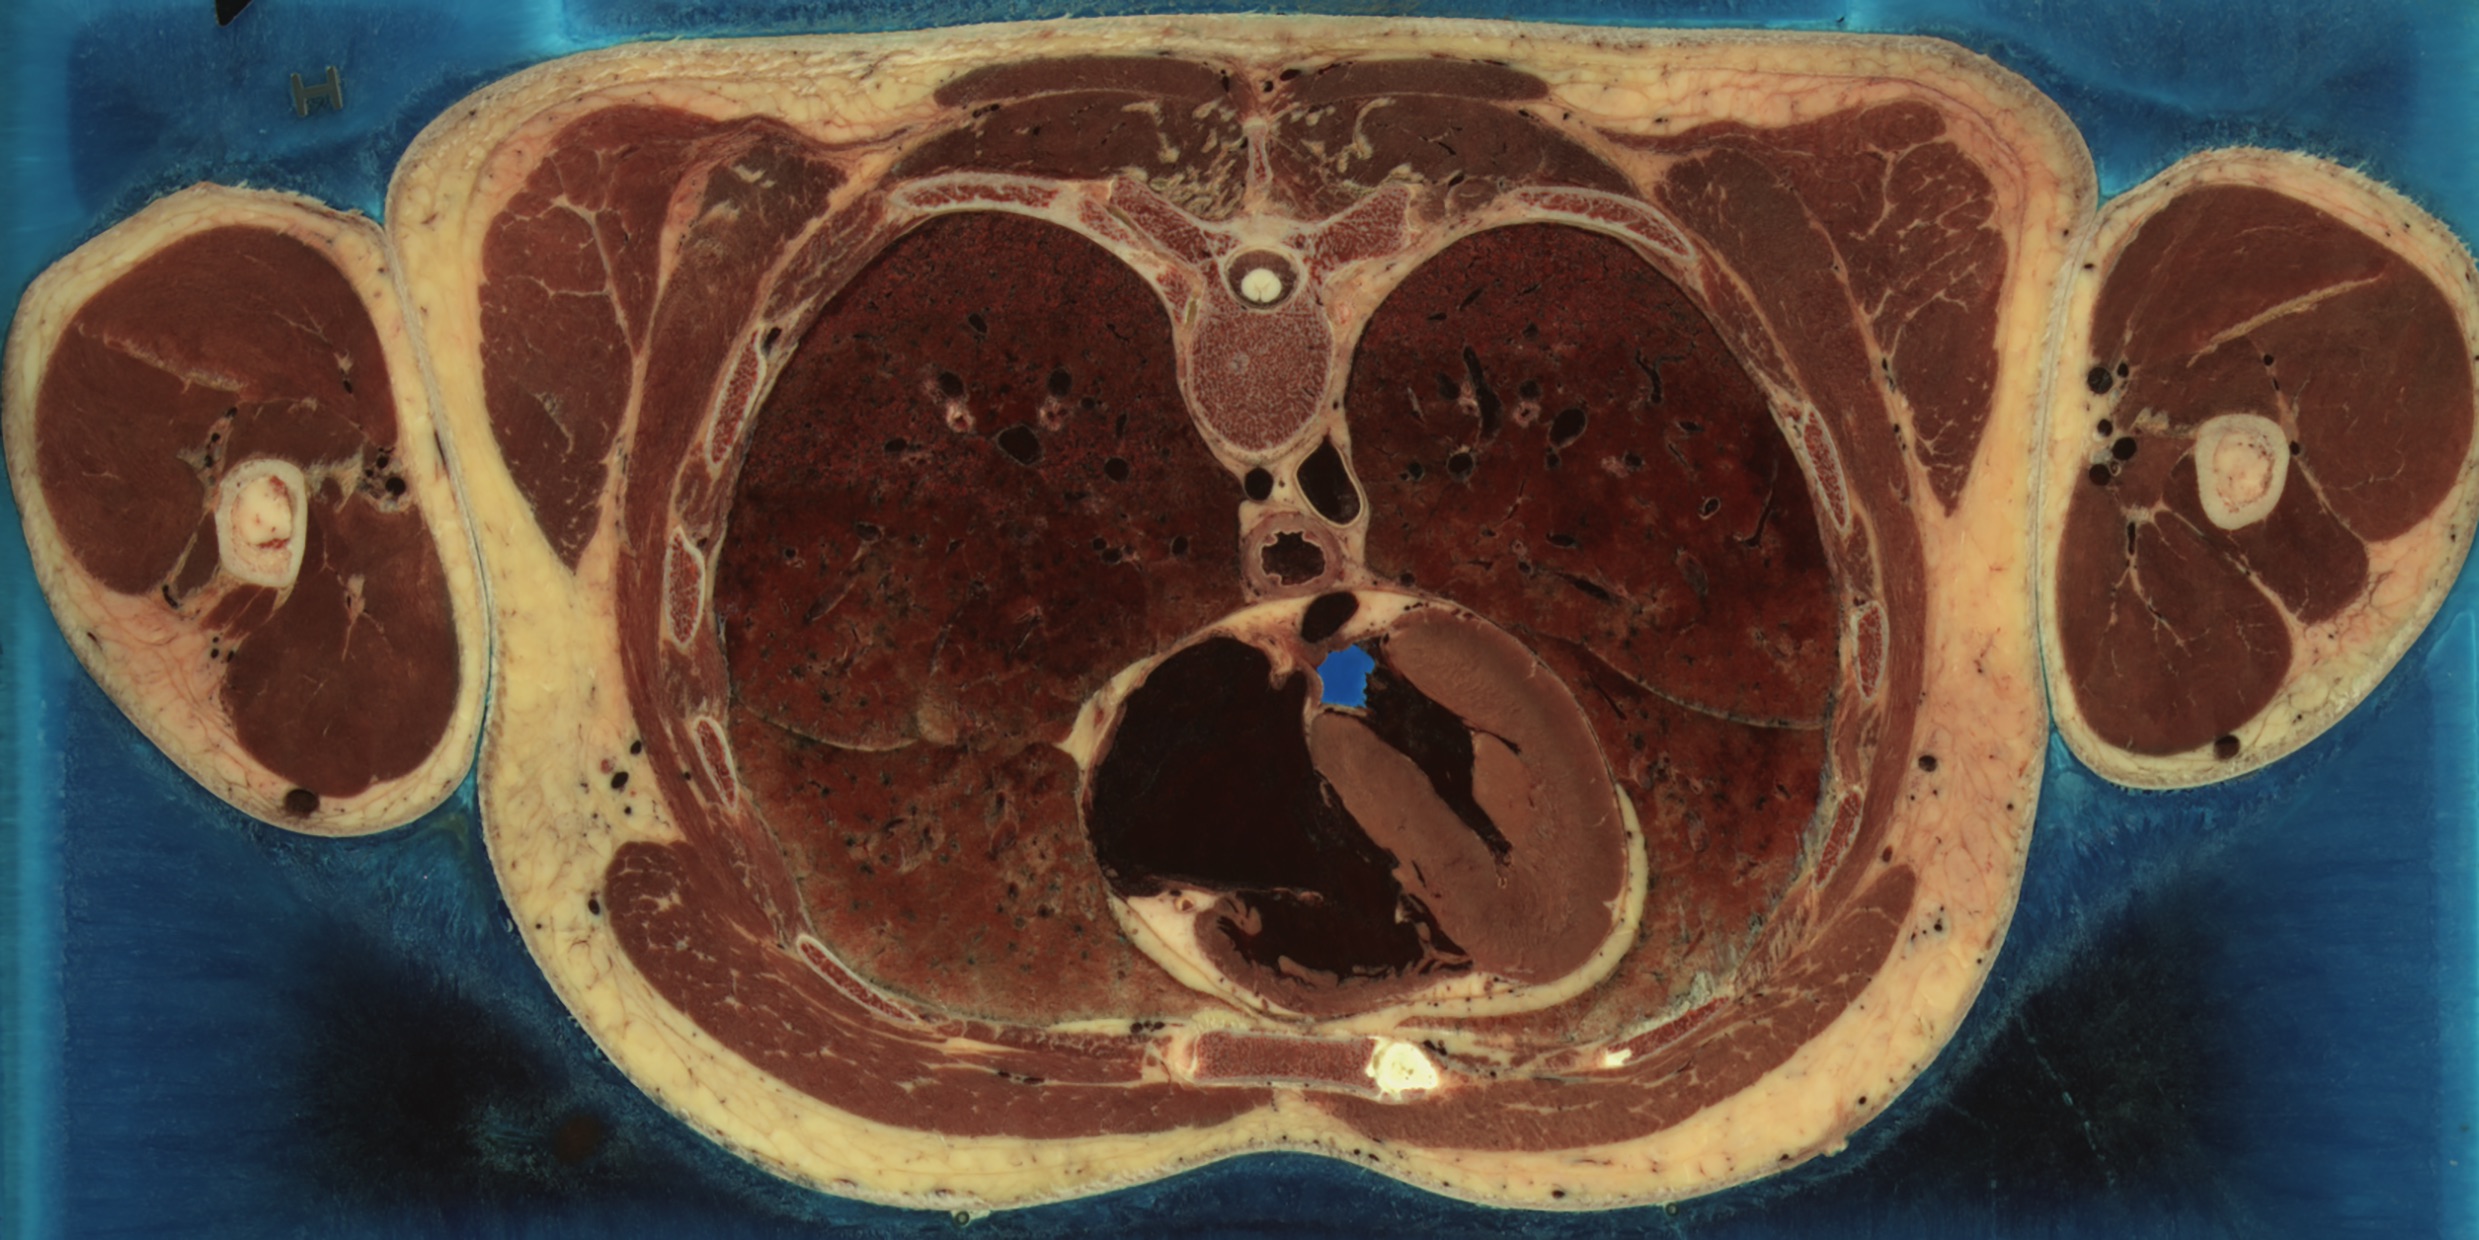 Anatomical cross-section image of the human body